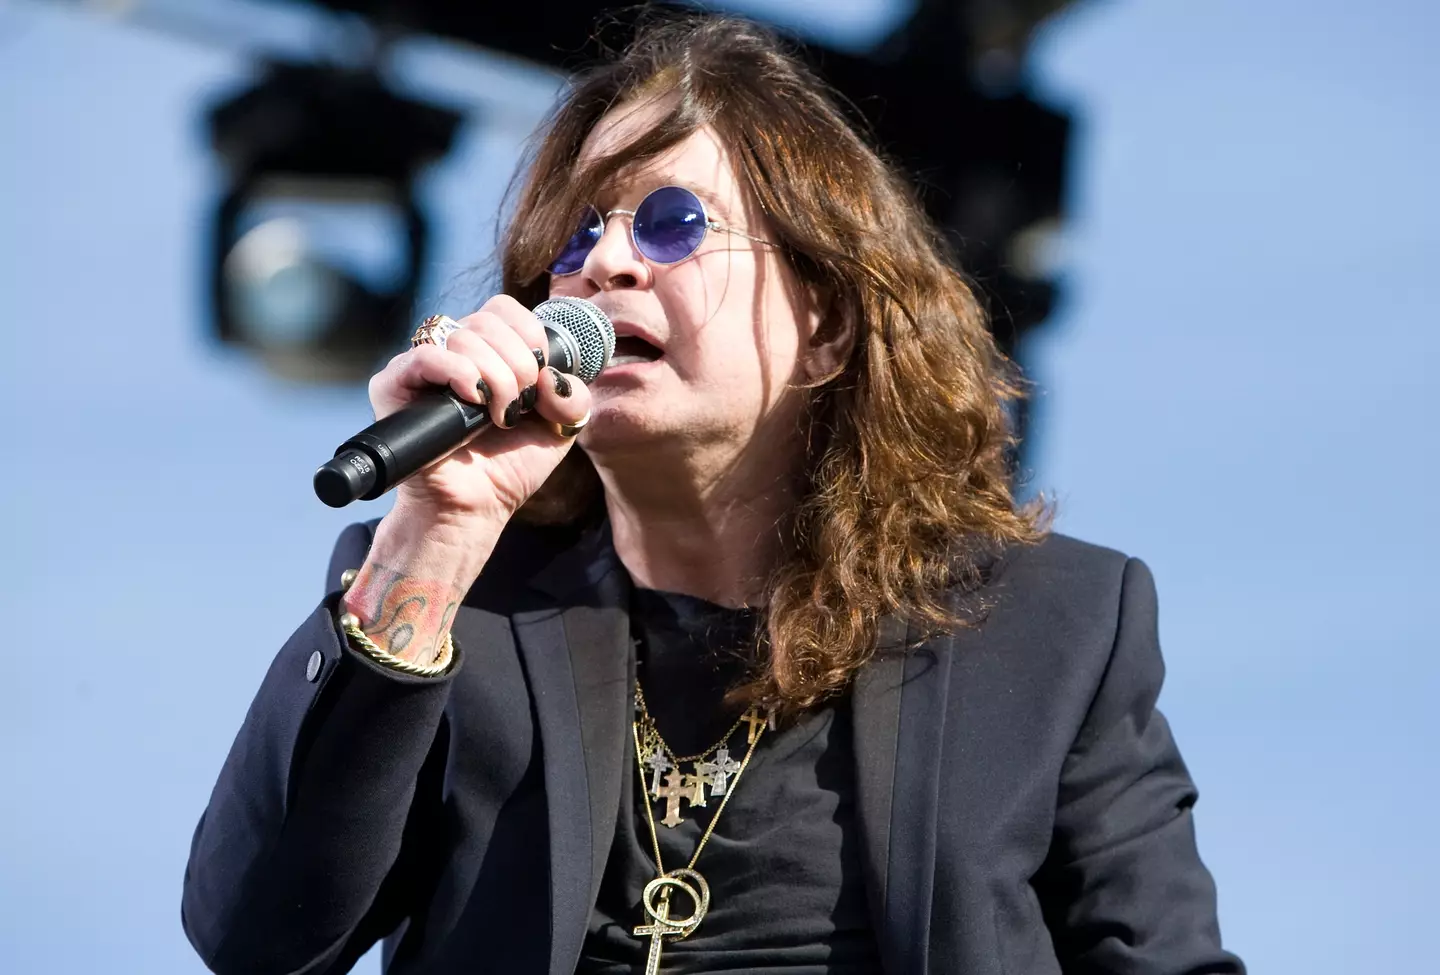 Ozzy on stage in 2010.